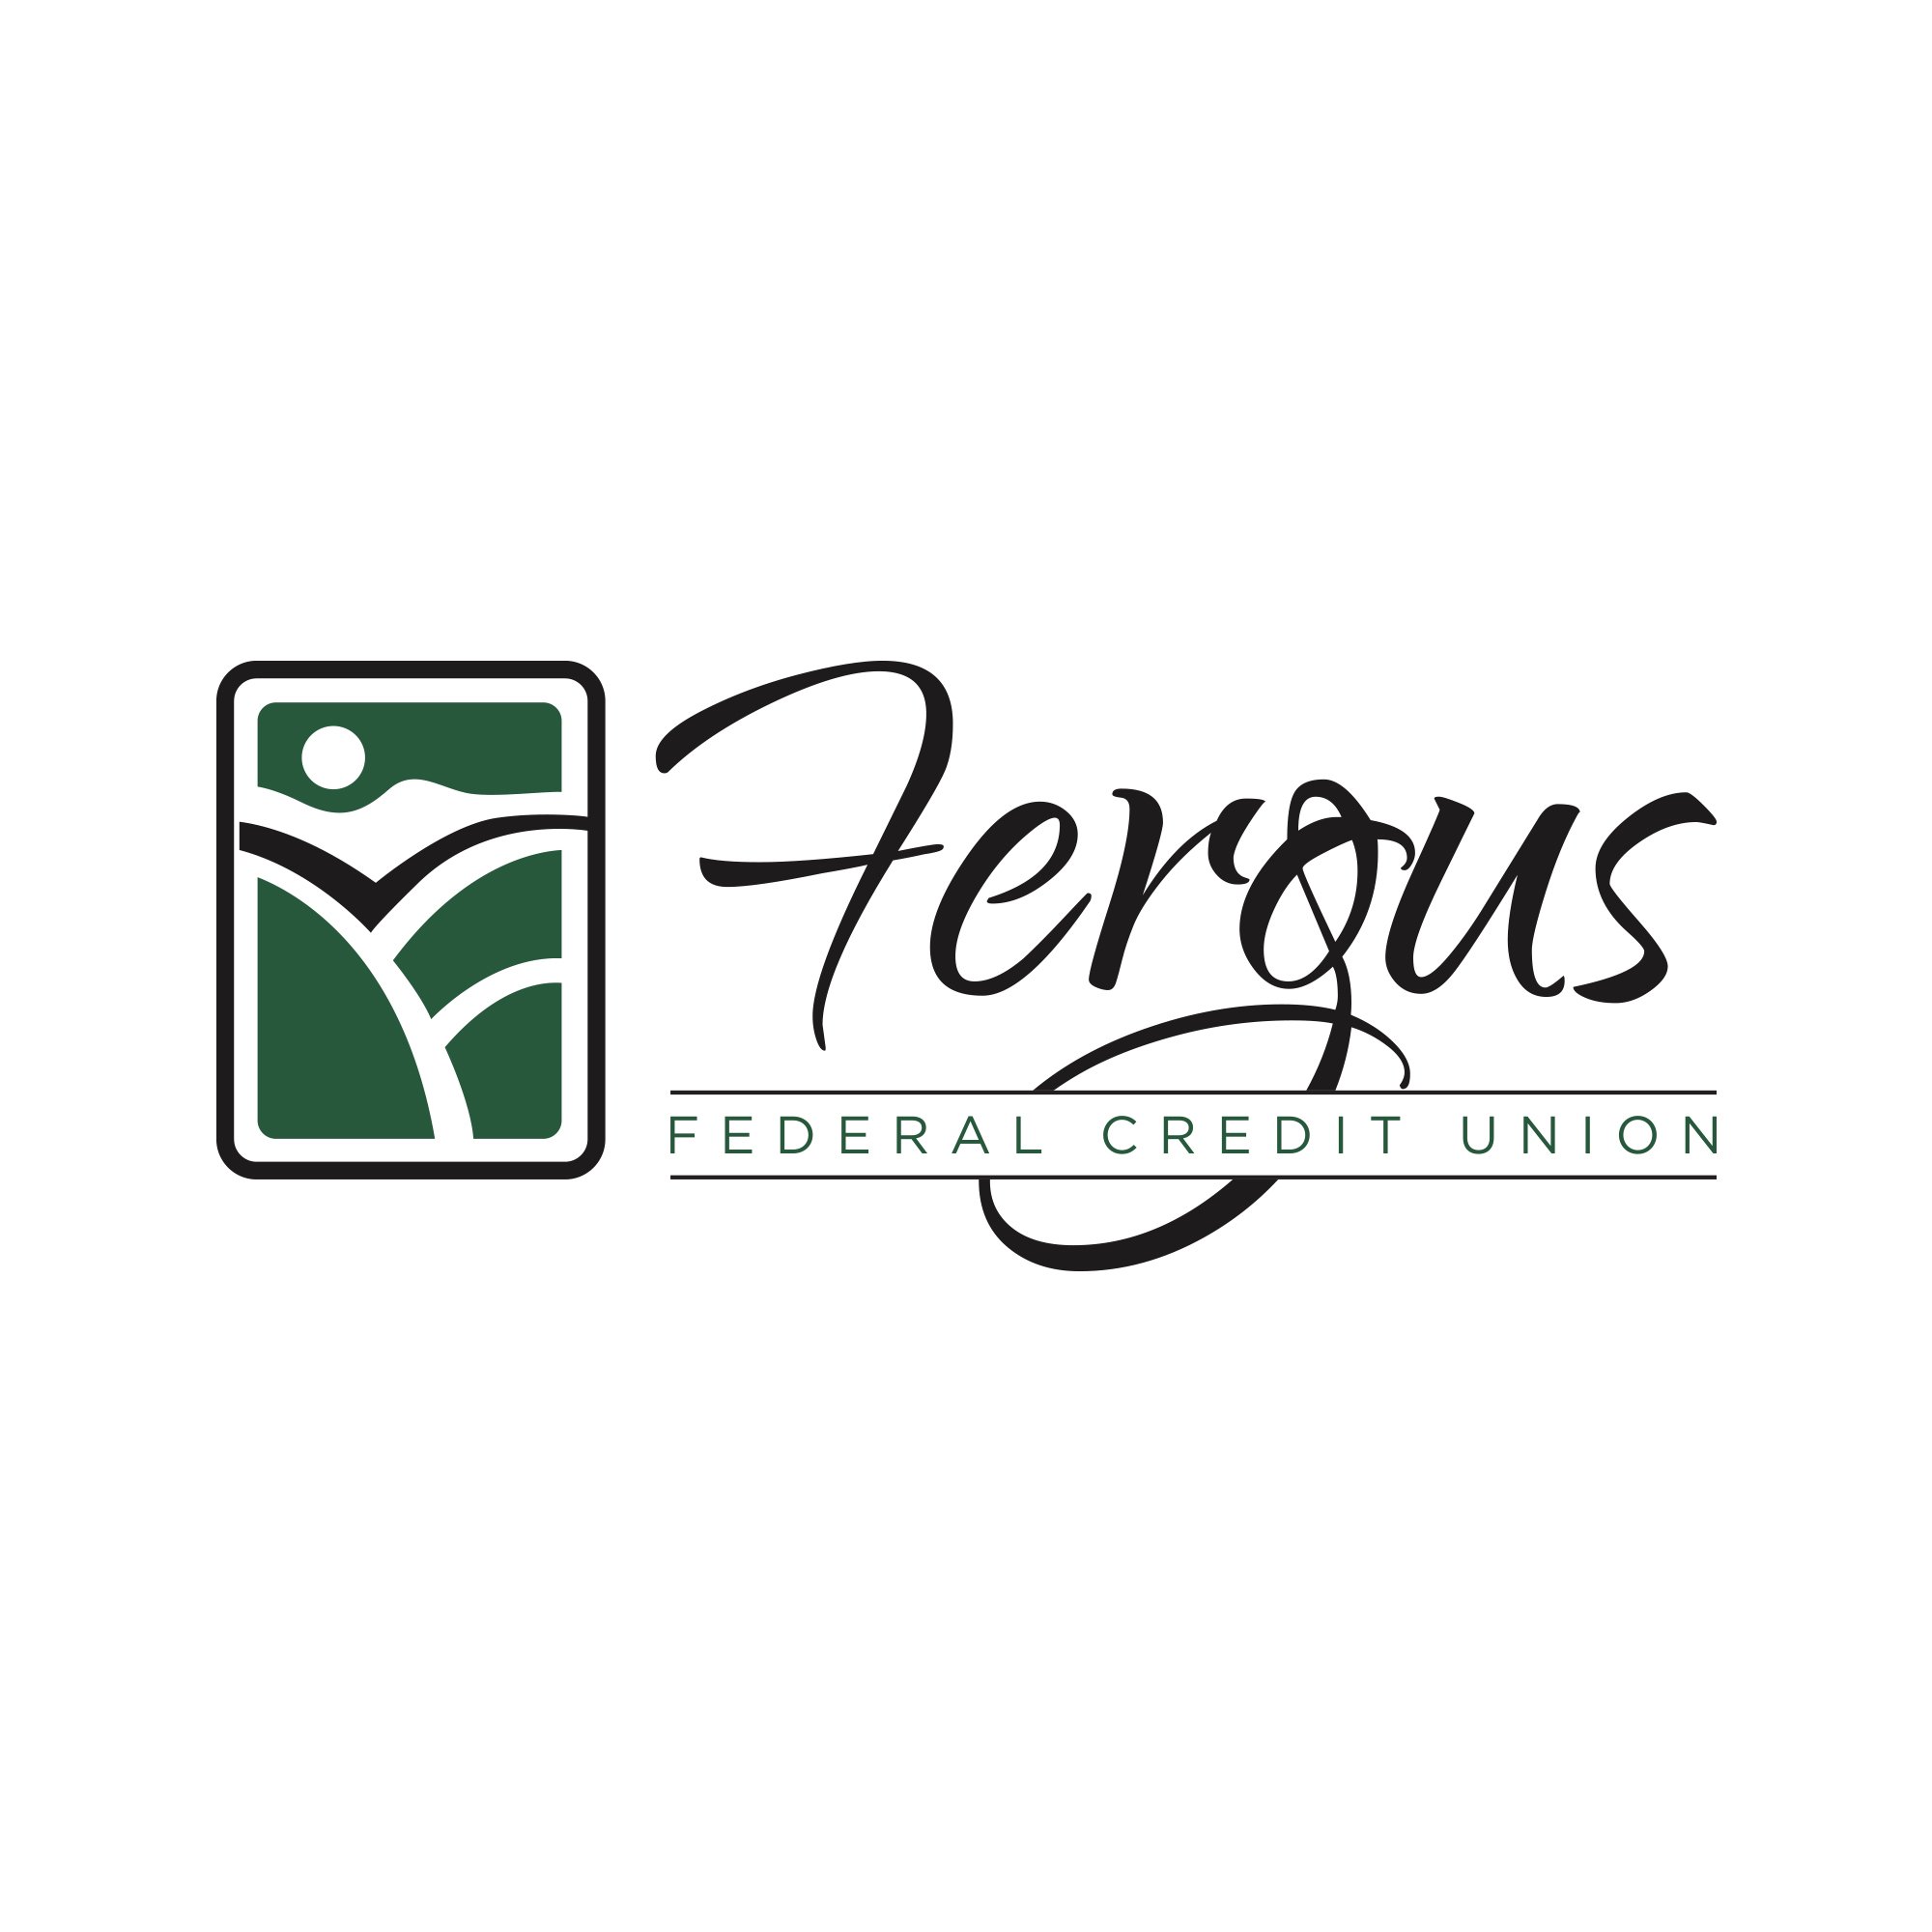 Fergus Federal Credit Union is locally owned and operated. Federally insured by the NCUA - Equal Opportunity Lender.